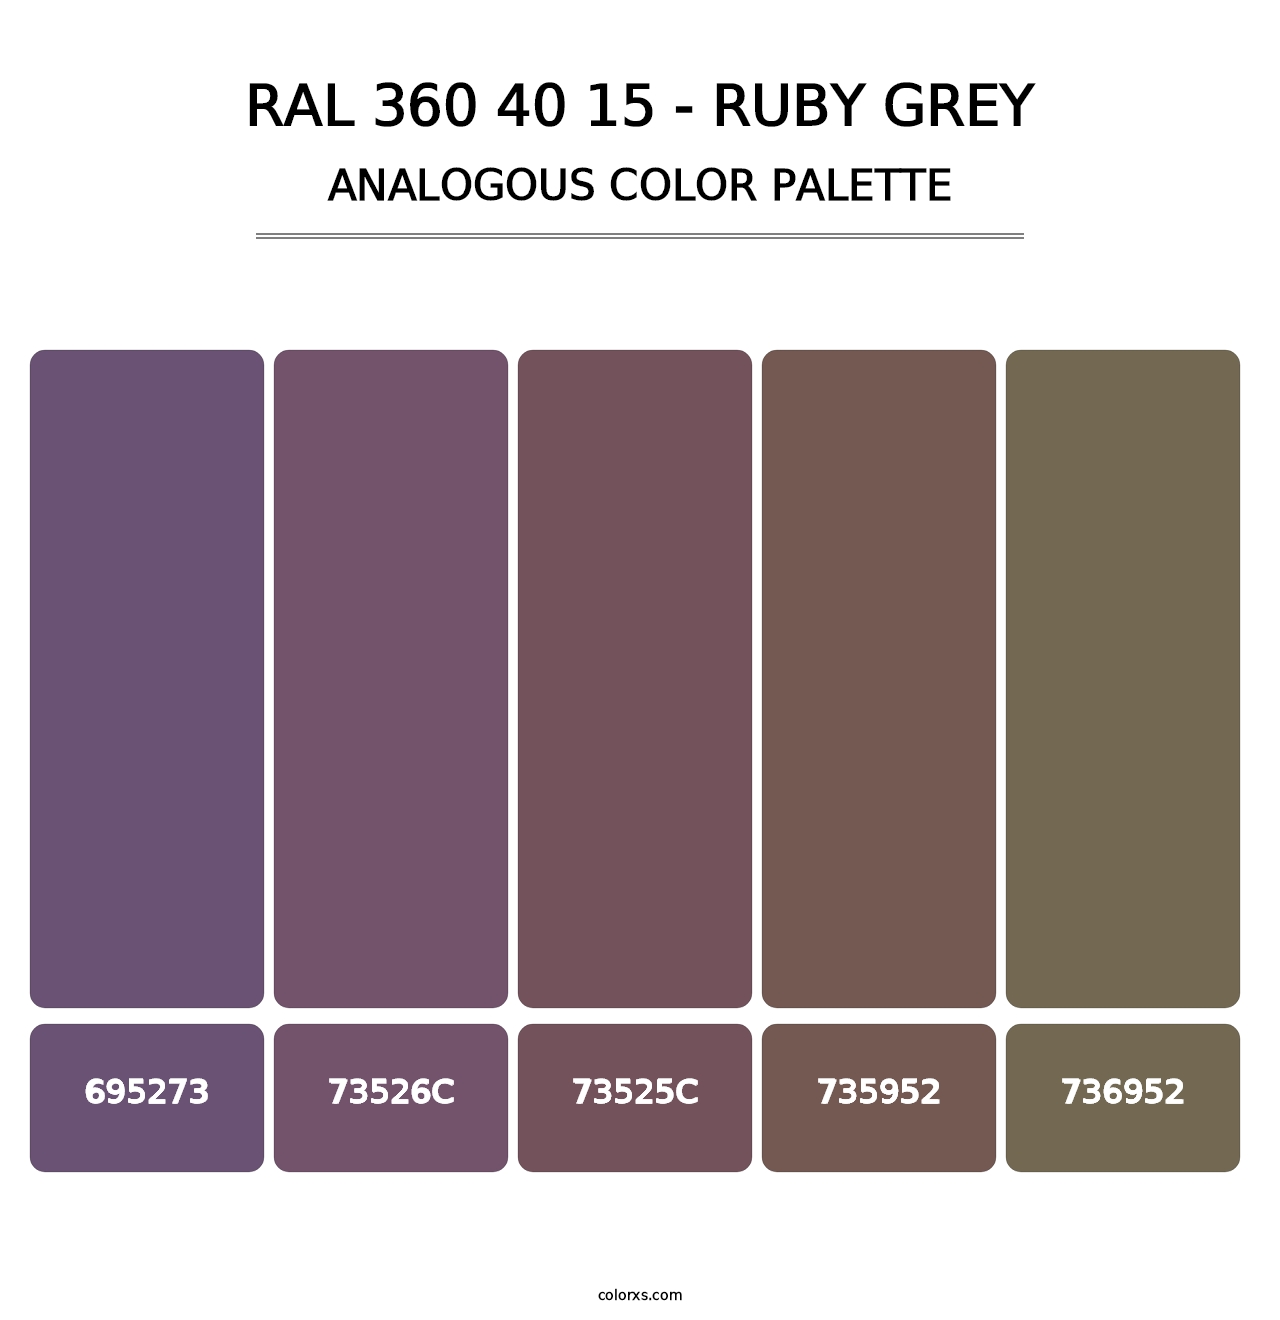 RAL 360 40 15 - Ruby Grey - Analogous Color Palette